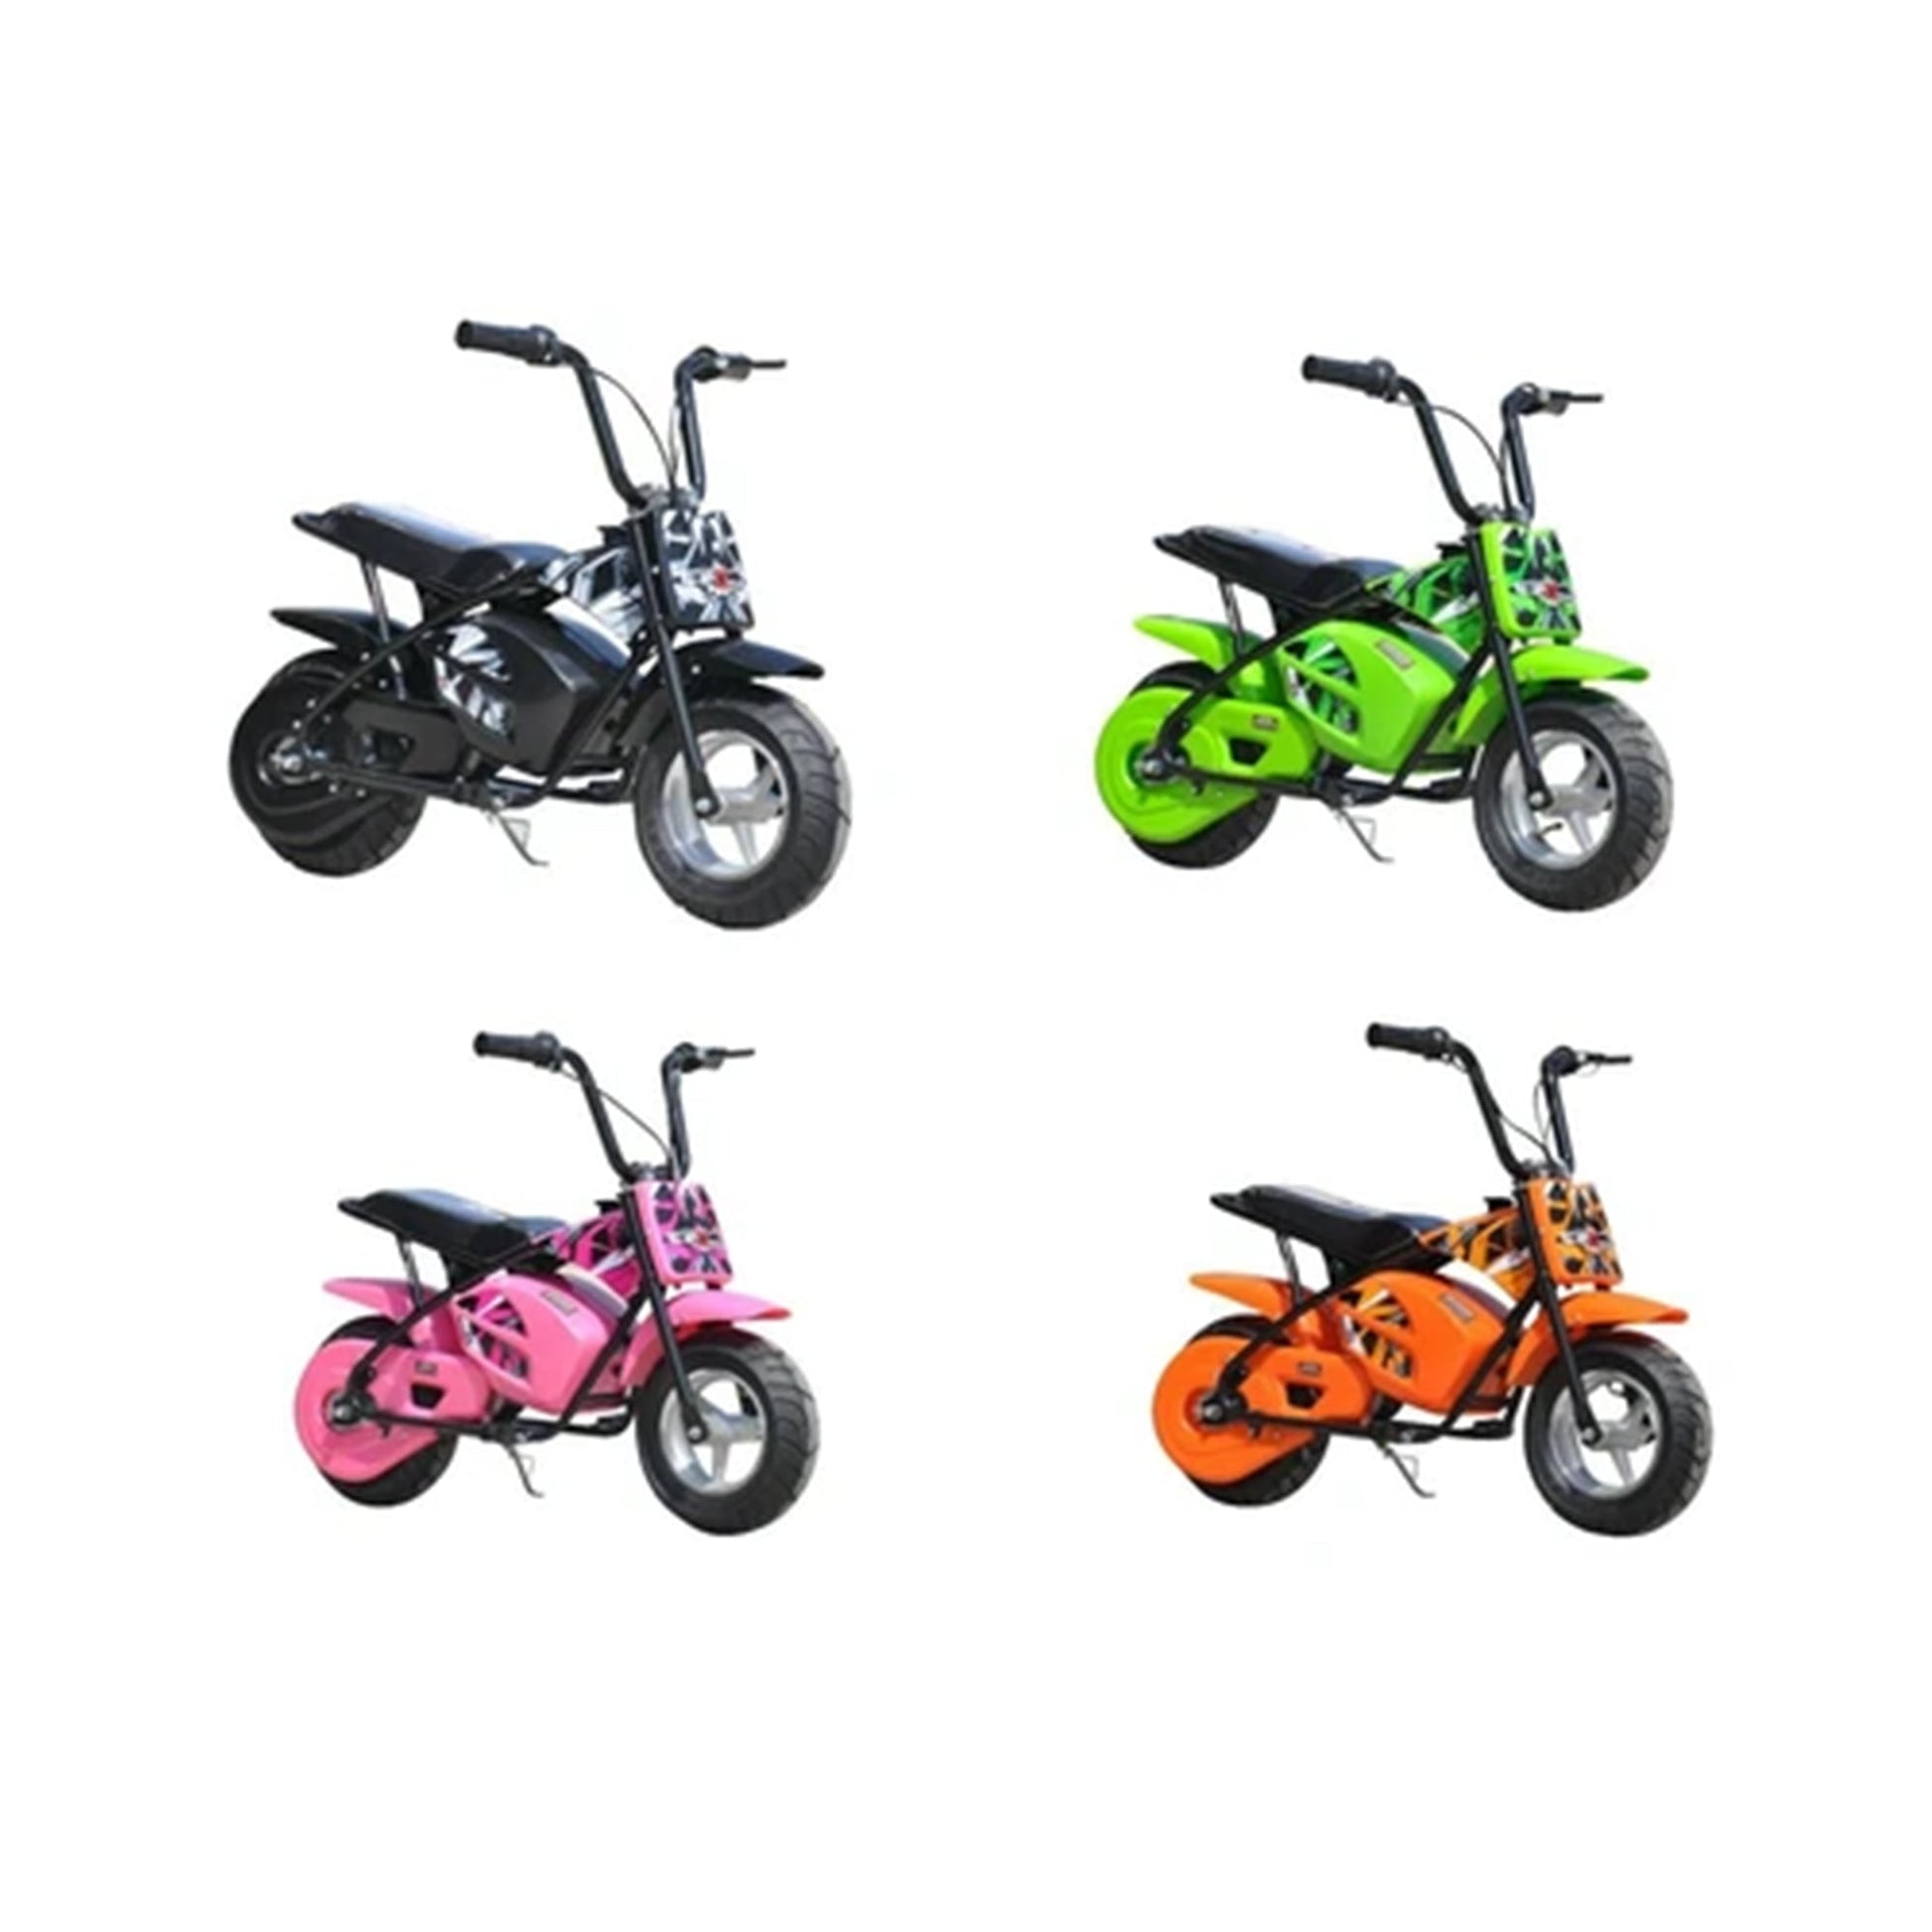 "Variety of Kids Dirt Bikes in Bright Colors", "Green Mini Scrambler for Children", "Kids Electric Ride-on 250 Watt", "12 Volt Brushless Motor Scooters on White Background"